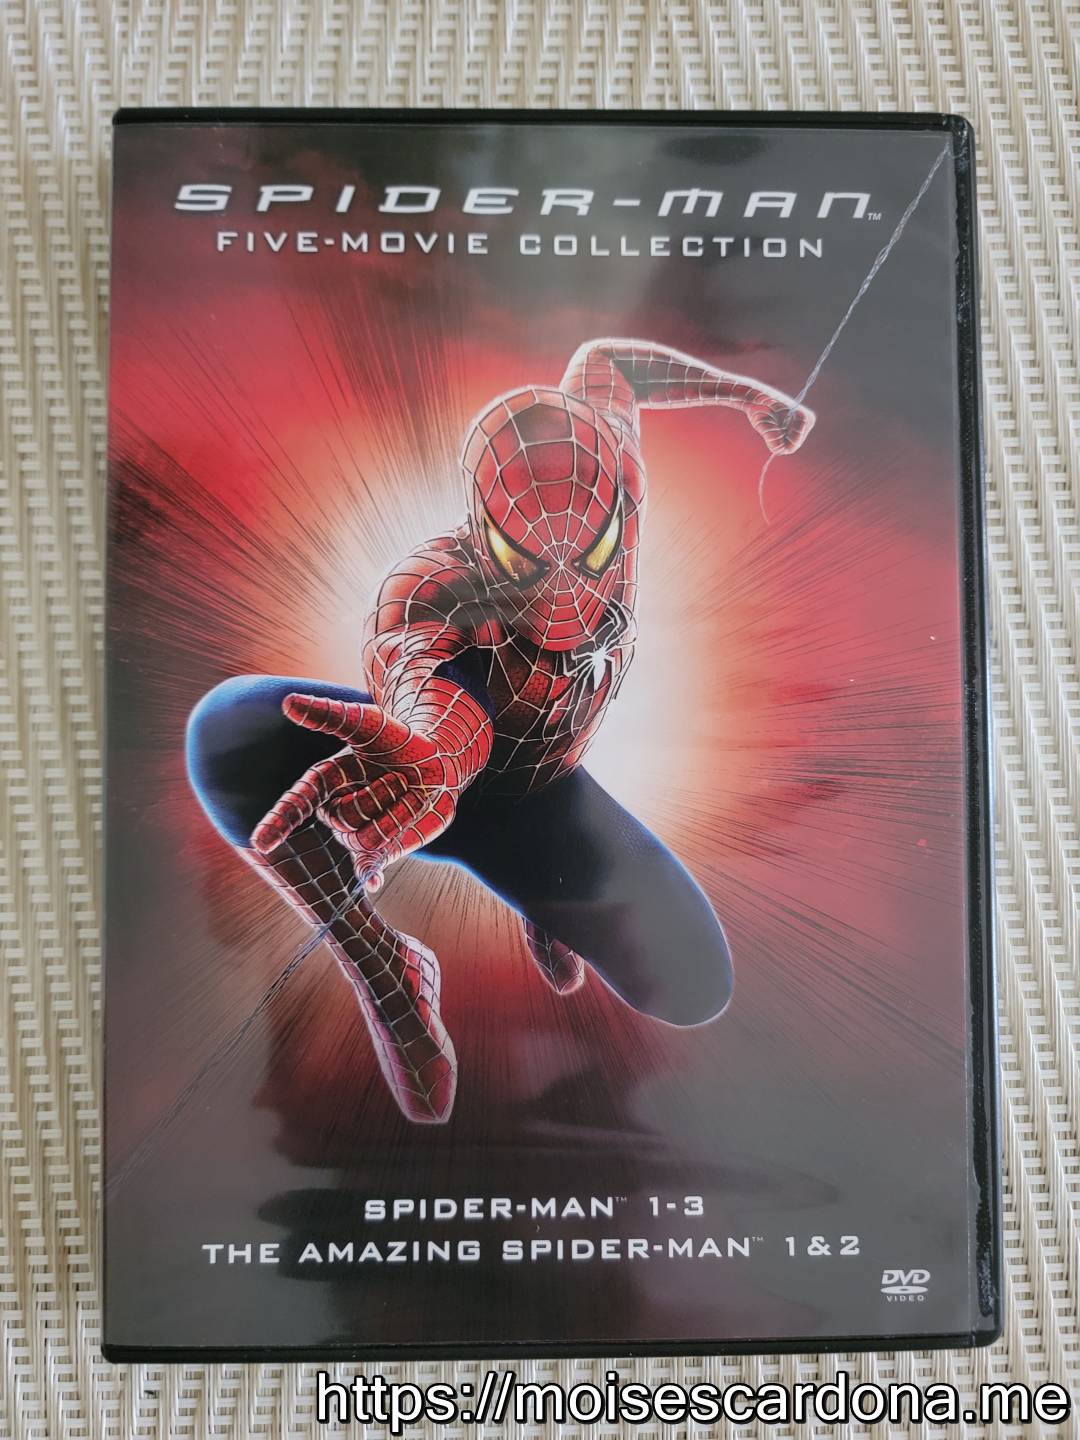 Spider-Man Five-Movie Collection - Front Box